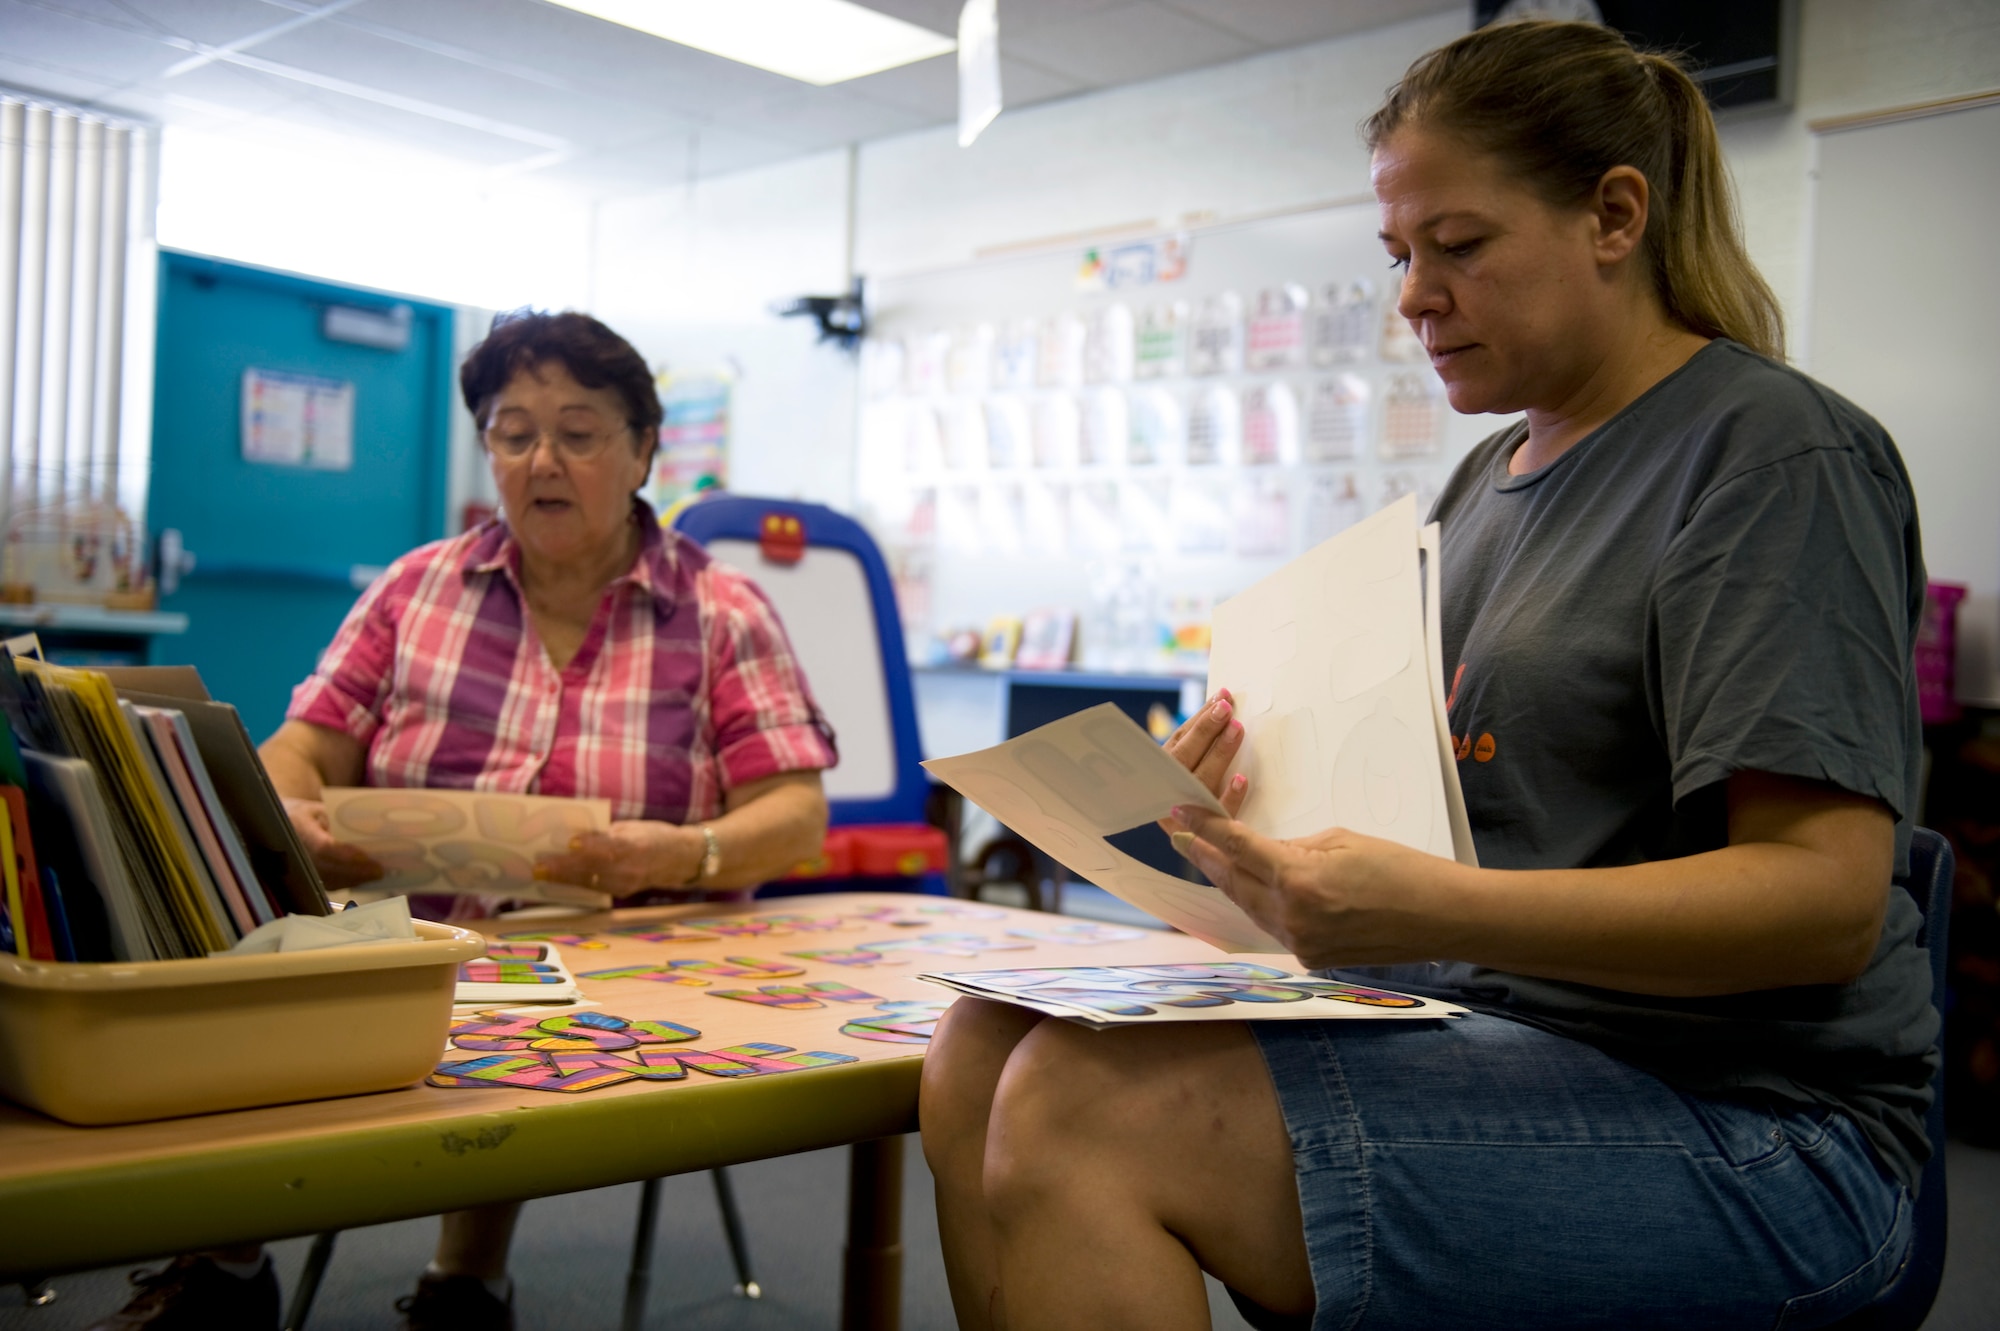 Dominga Romero (left), special programs teacher assistant, and Terri Gravnitz (right), early childhood special education teacher, prepare their classroom for the start of the new school year at Lomie G. Heard Elementary School on Nellis Air Force Base, Nev., Aug. 21, 2014. The new school year will include many opportunities for families to get involved with school activities, as well as teaching the children to love learning in a safe environment. (U.S. Air Force photo by Airman 1st Class Mikaley Towle)